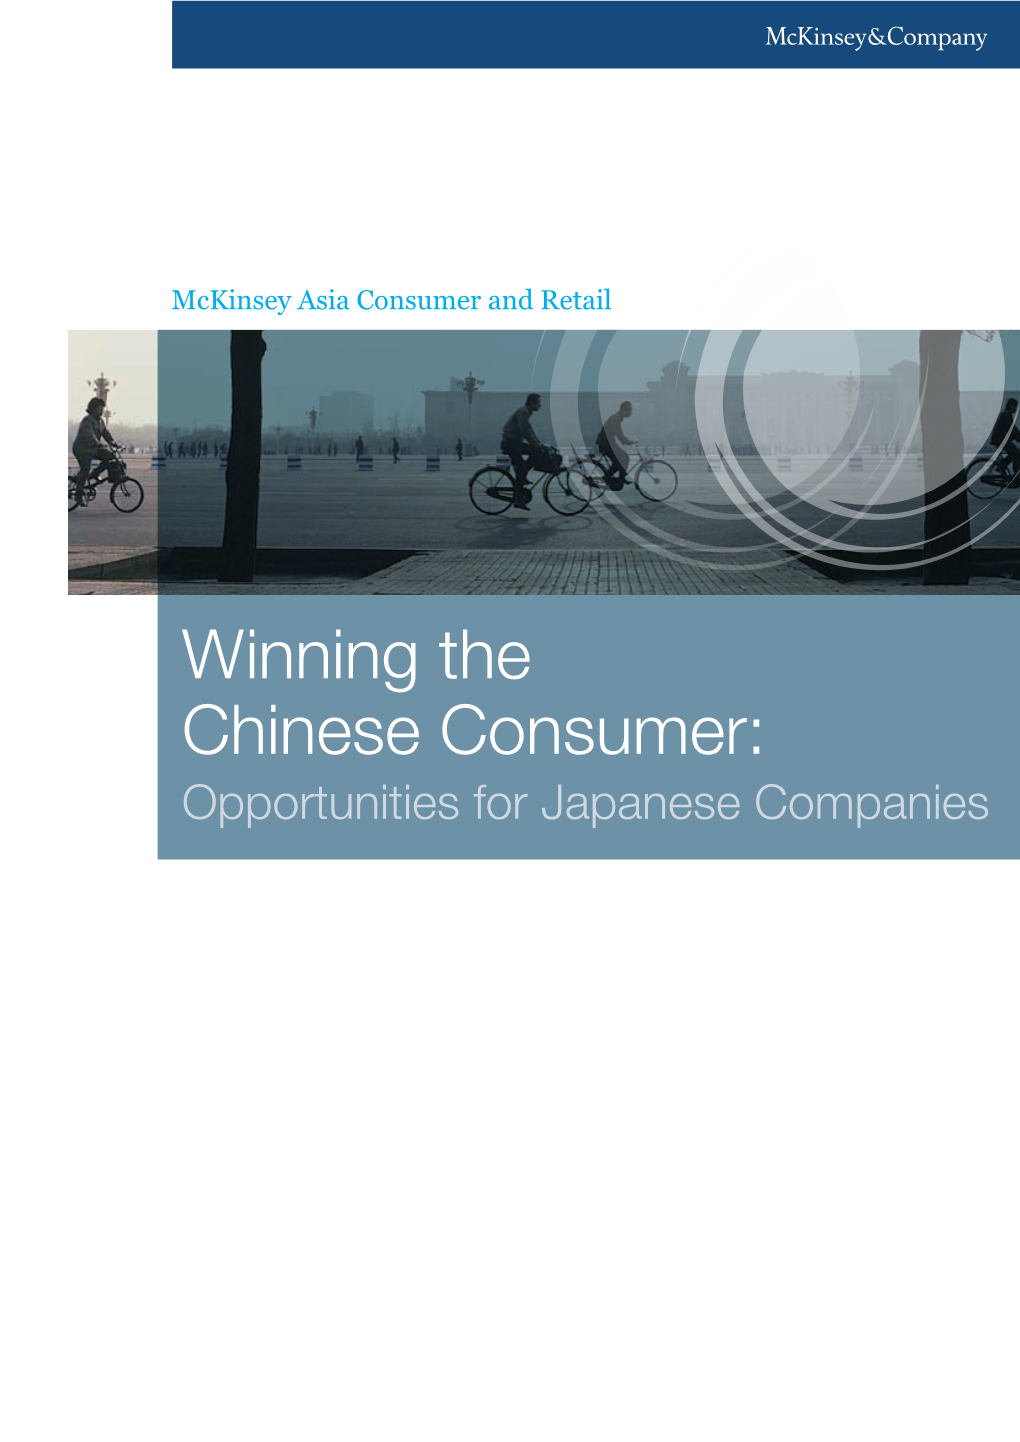 Winning the Chinese Consumer: Opportunities for Japanese Companies